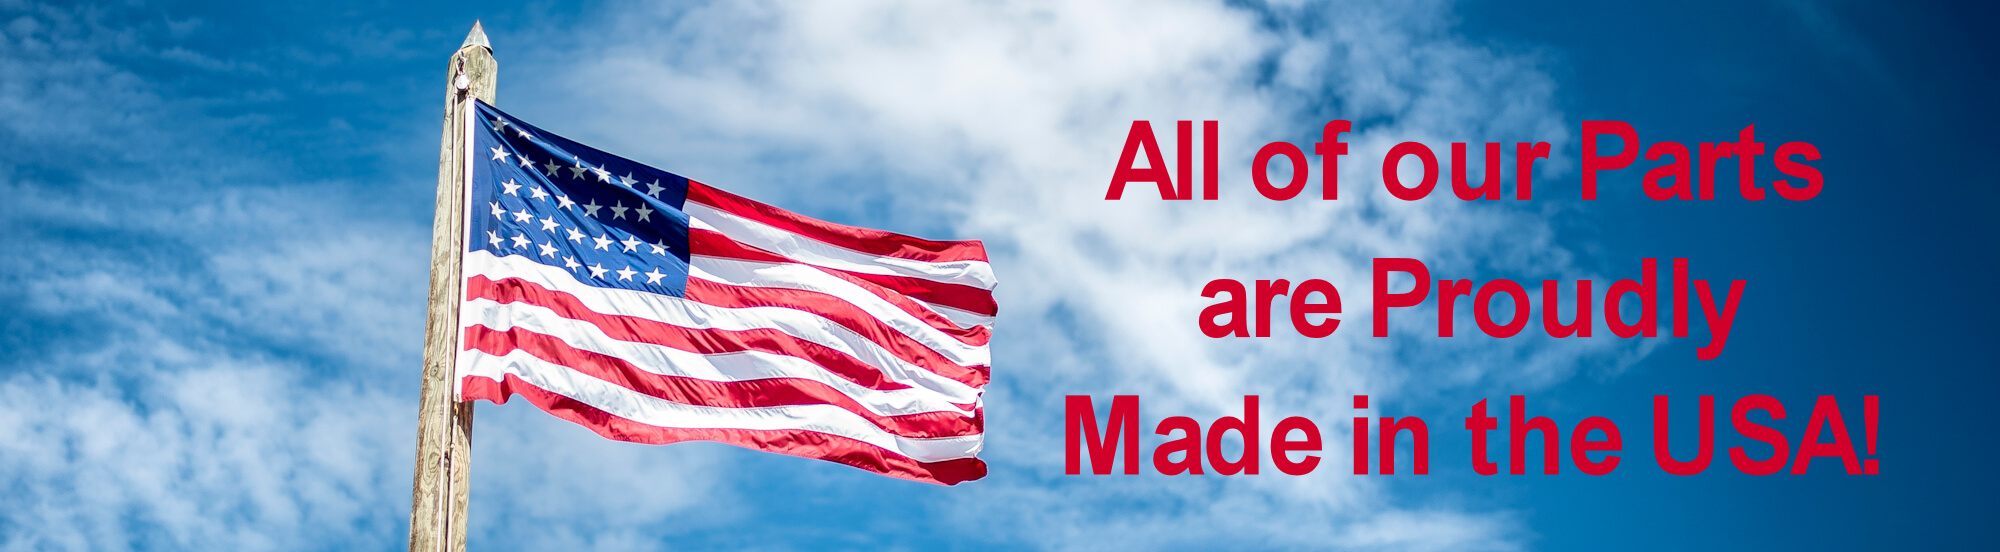 All Model Parts Proudly Made in the USA!